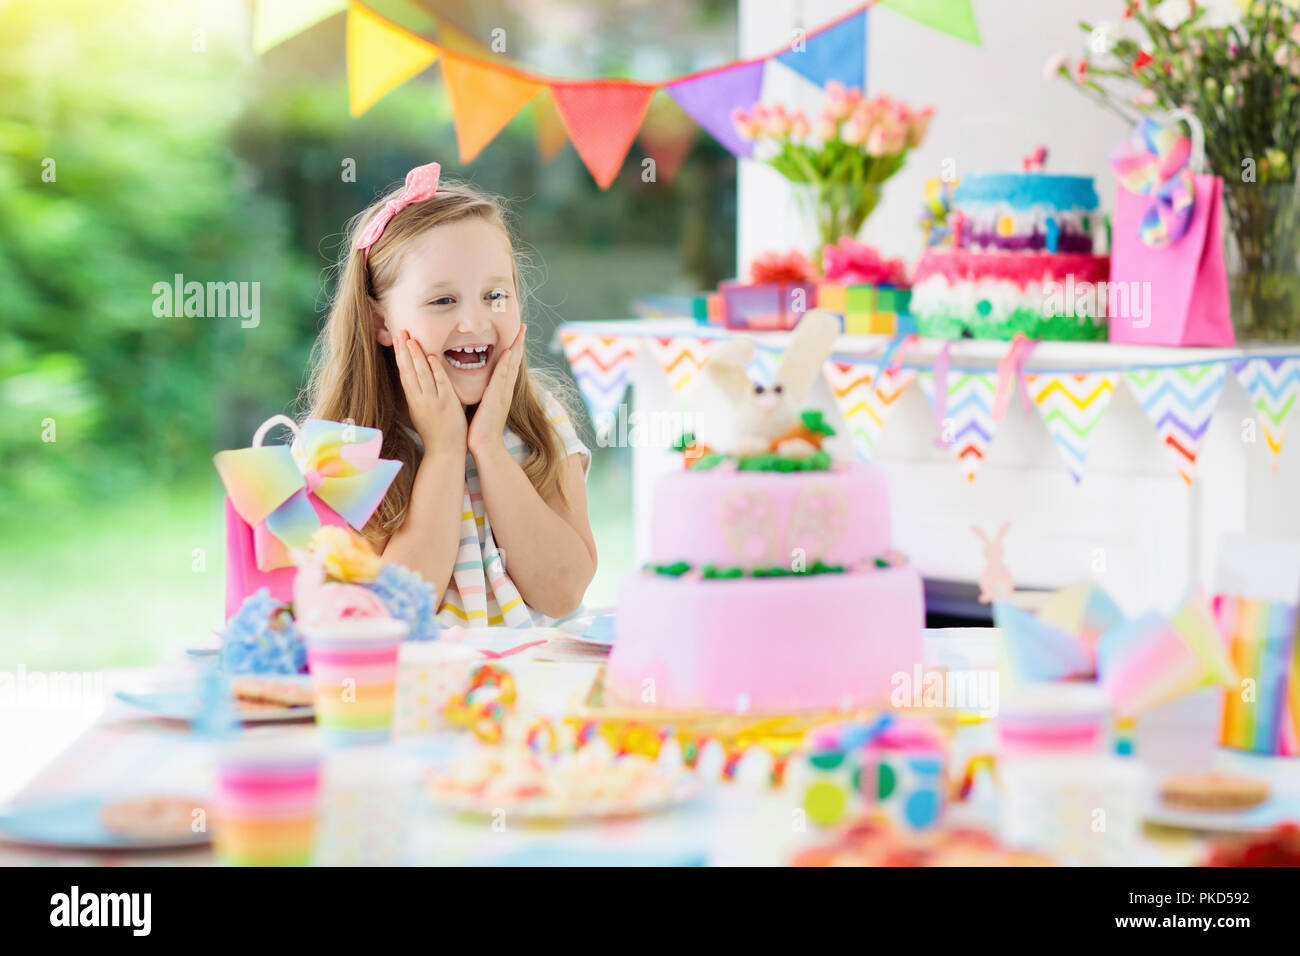 Kids birthday party with colorful rainbow pastel decoration and bunny layer cake. Little girl with sweets, candy and fruit. Balloons and banner at fes Stock Photo